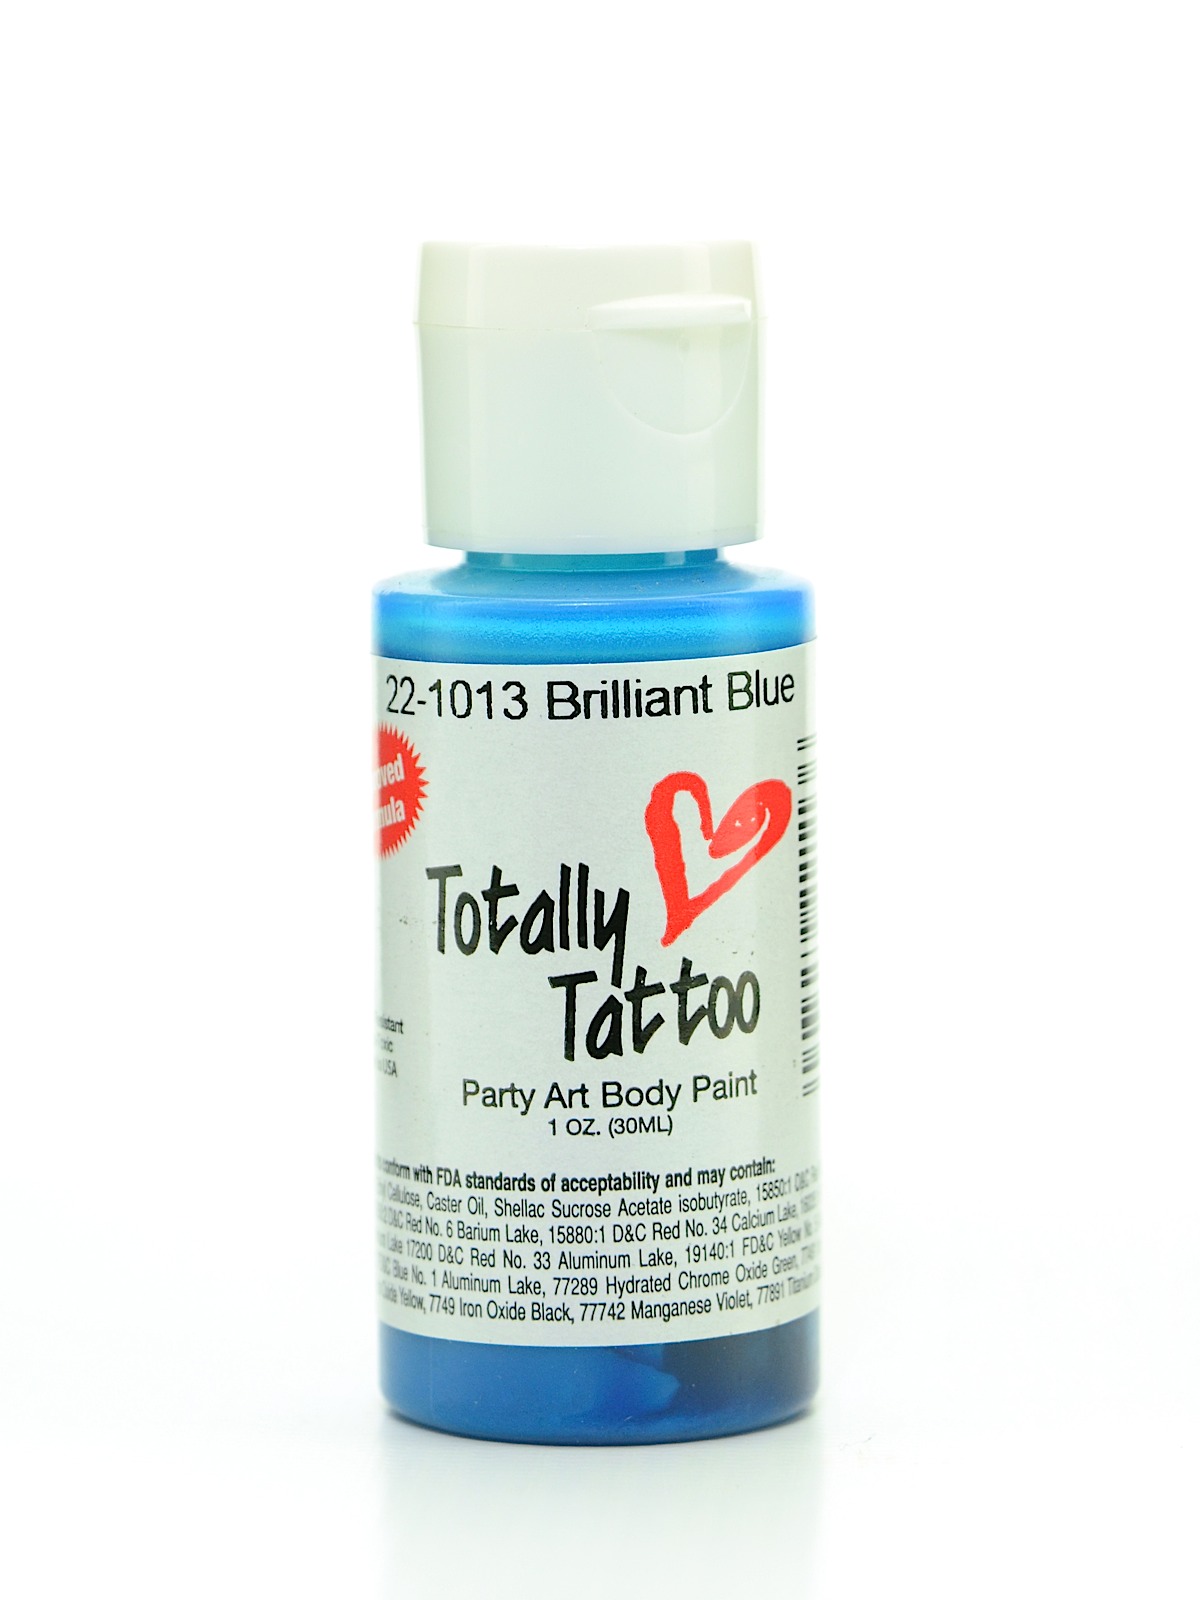 Totally Tattoo System Body Paint Brilliant Blue 1 Oz.